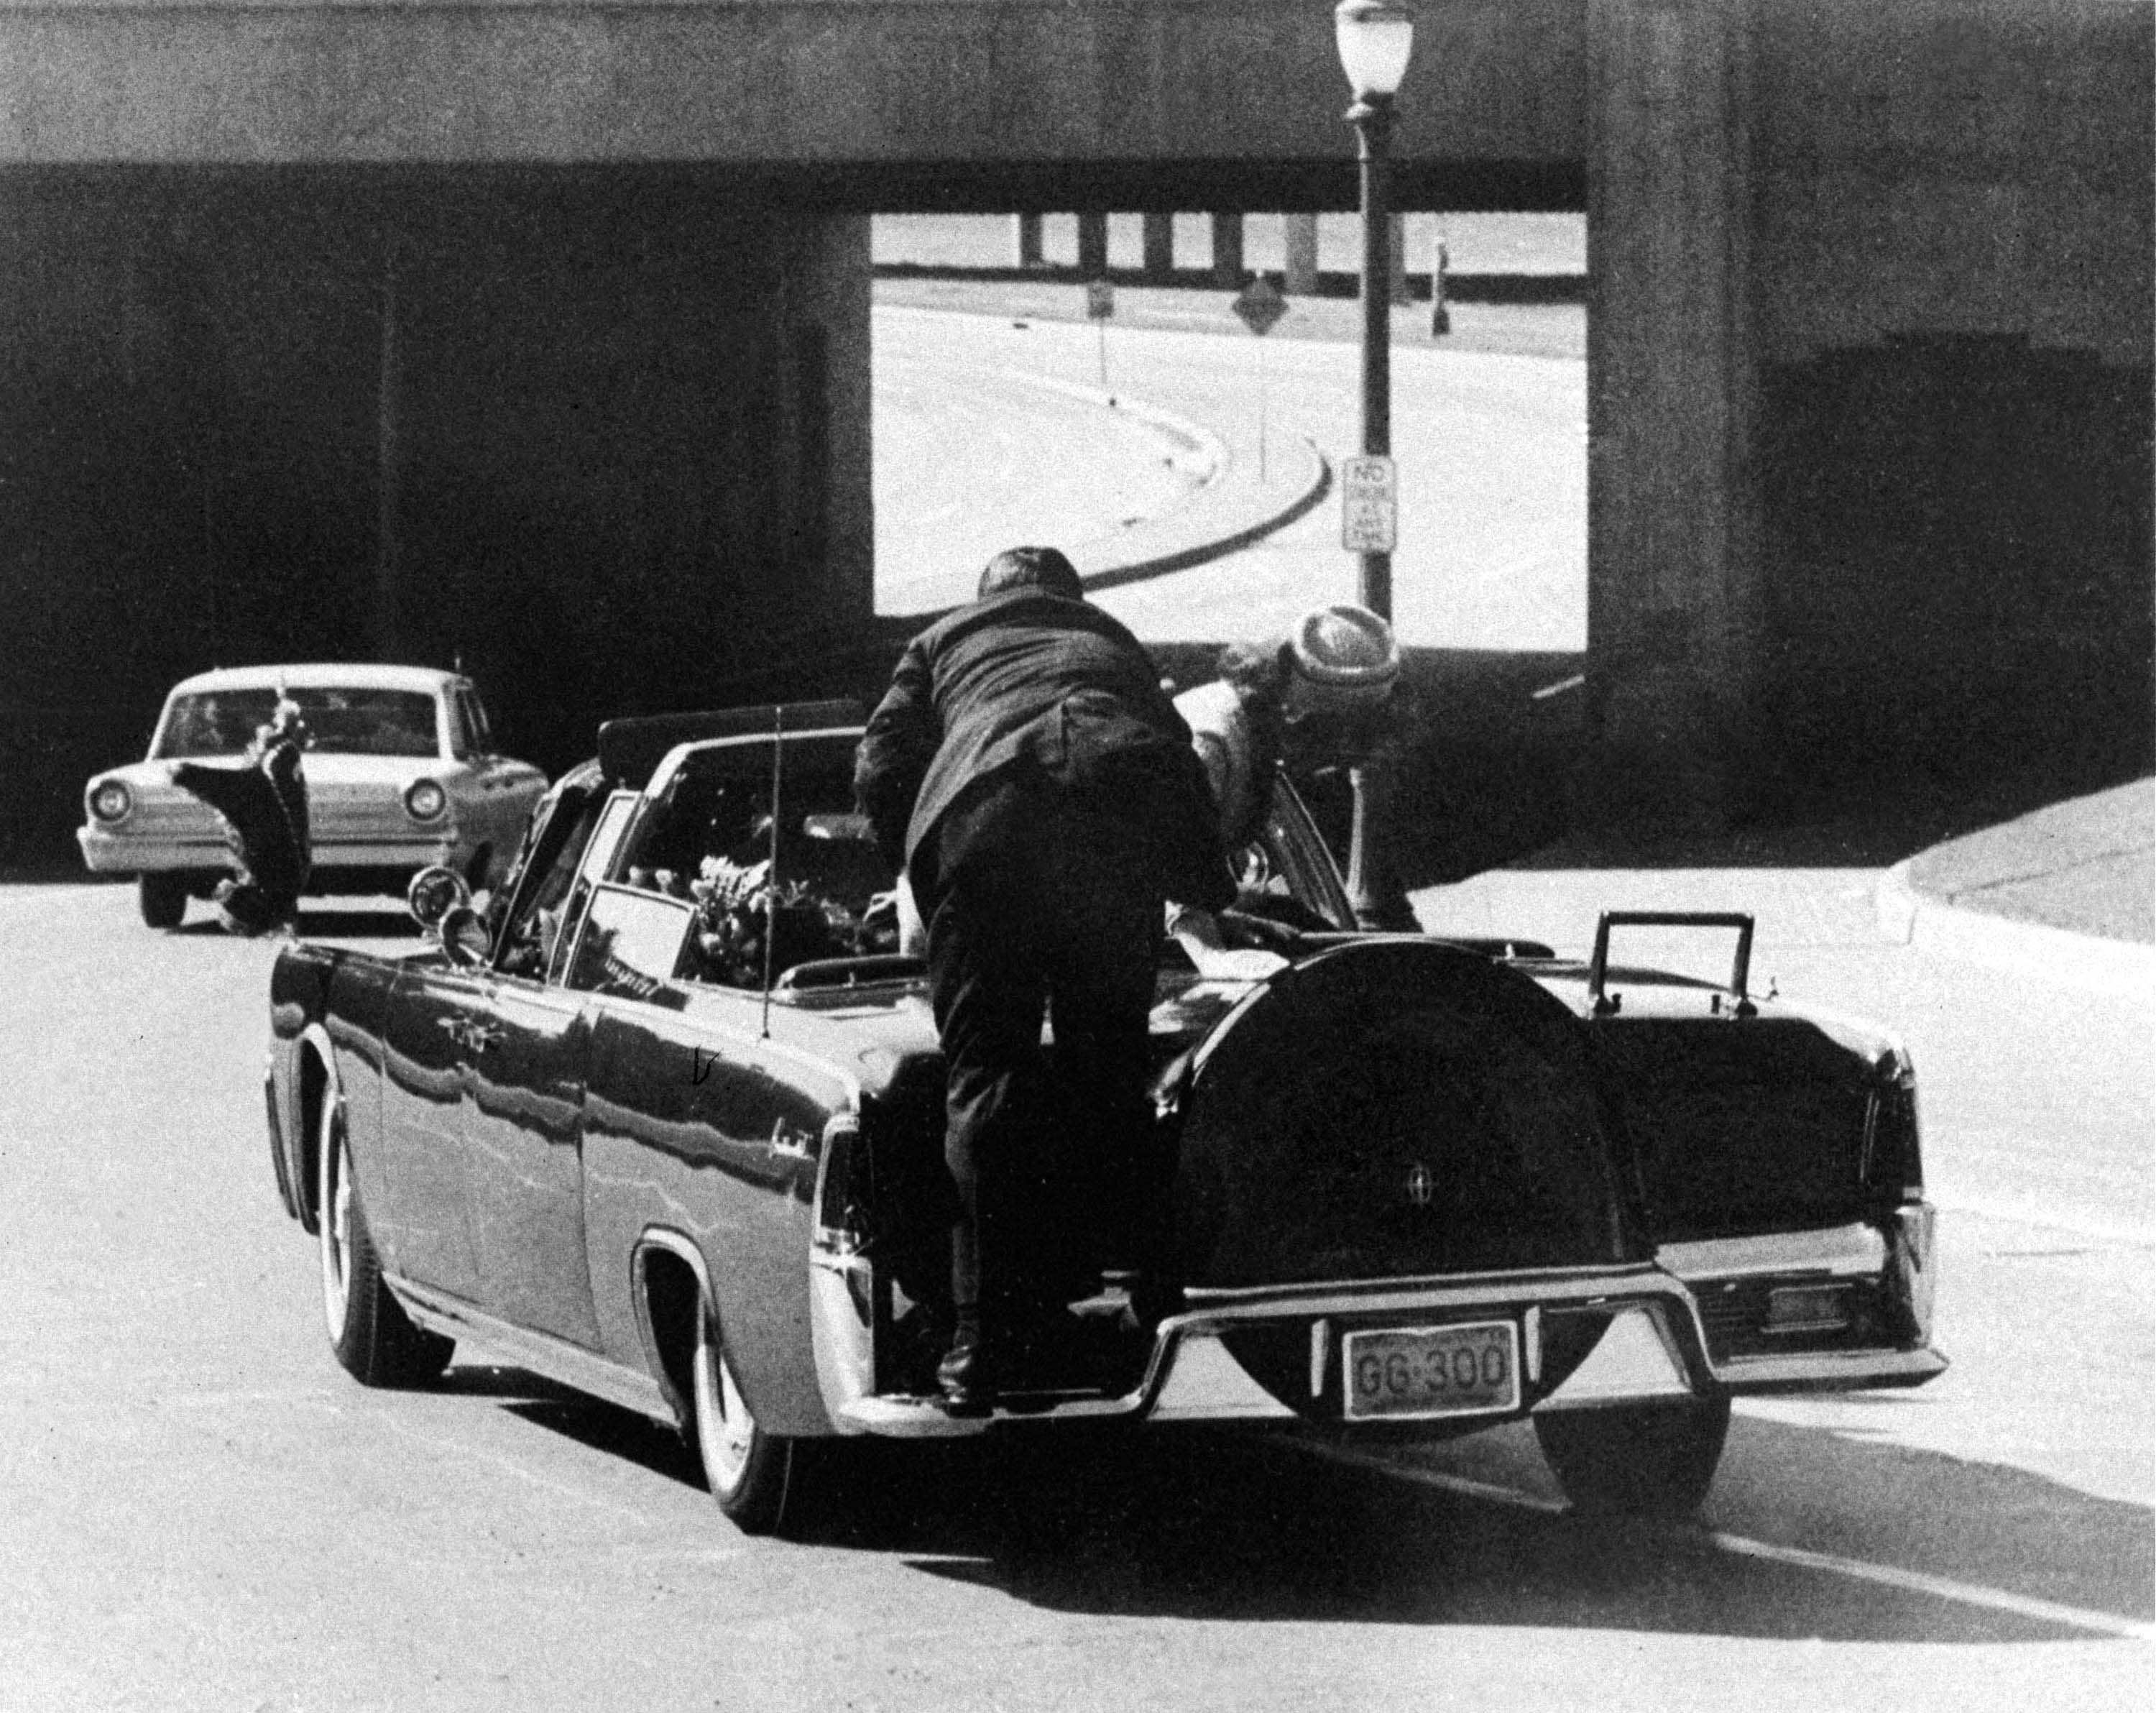 Secret Service Agent Clint Hill leaps aboard presidential limousine to shield JFK and Mrs. Kennedy as shots are fired in Dallas on 11.22/63